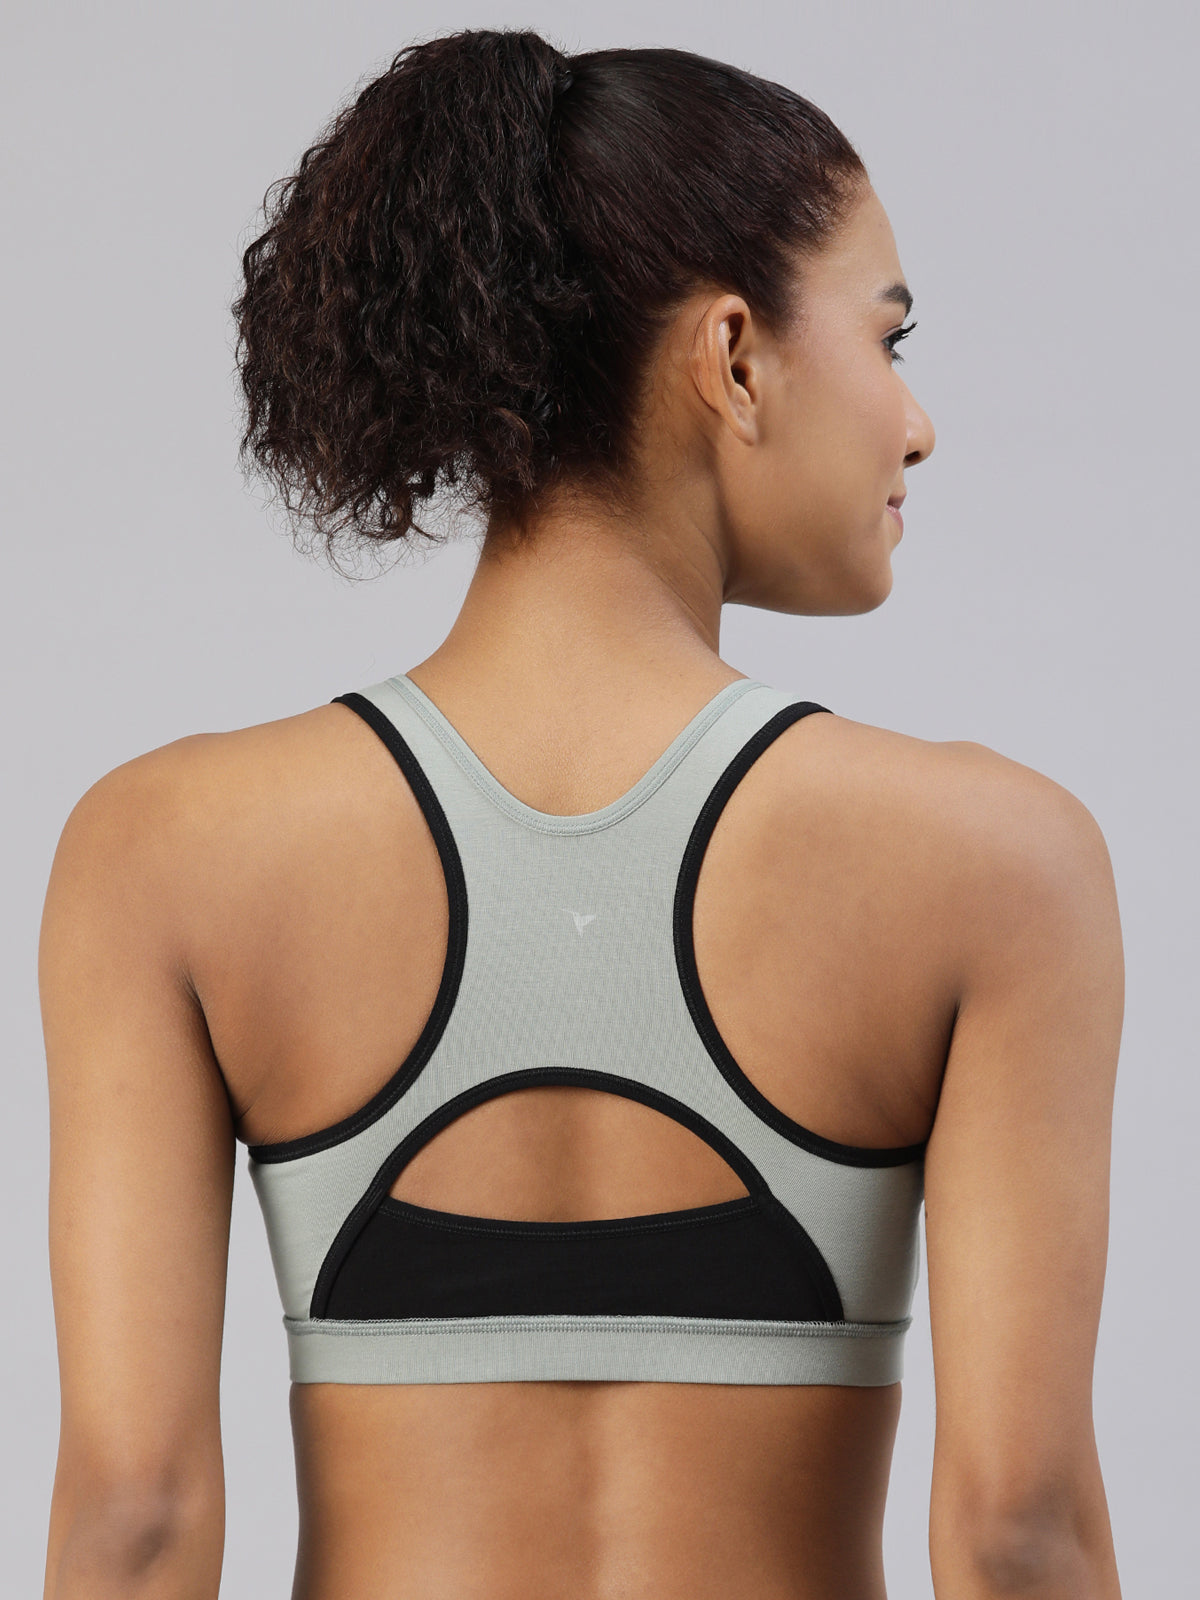 blossom-workout bra-iceberg green3-Sports collection-utility based bra